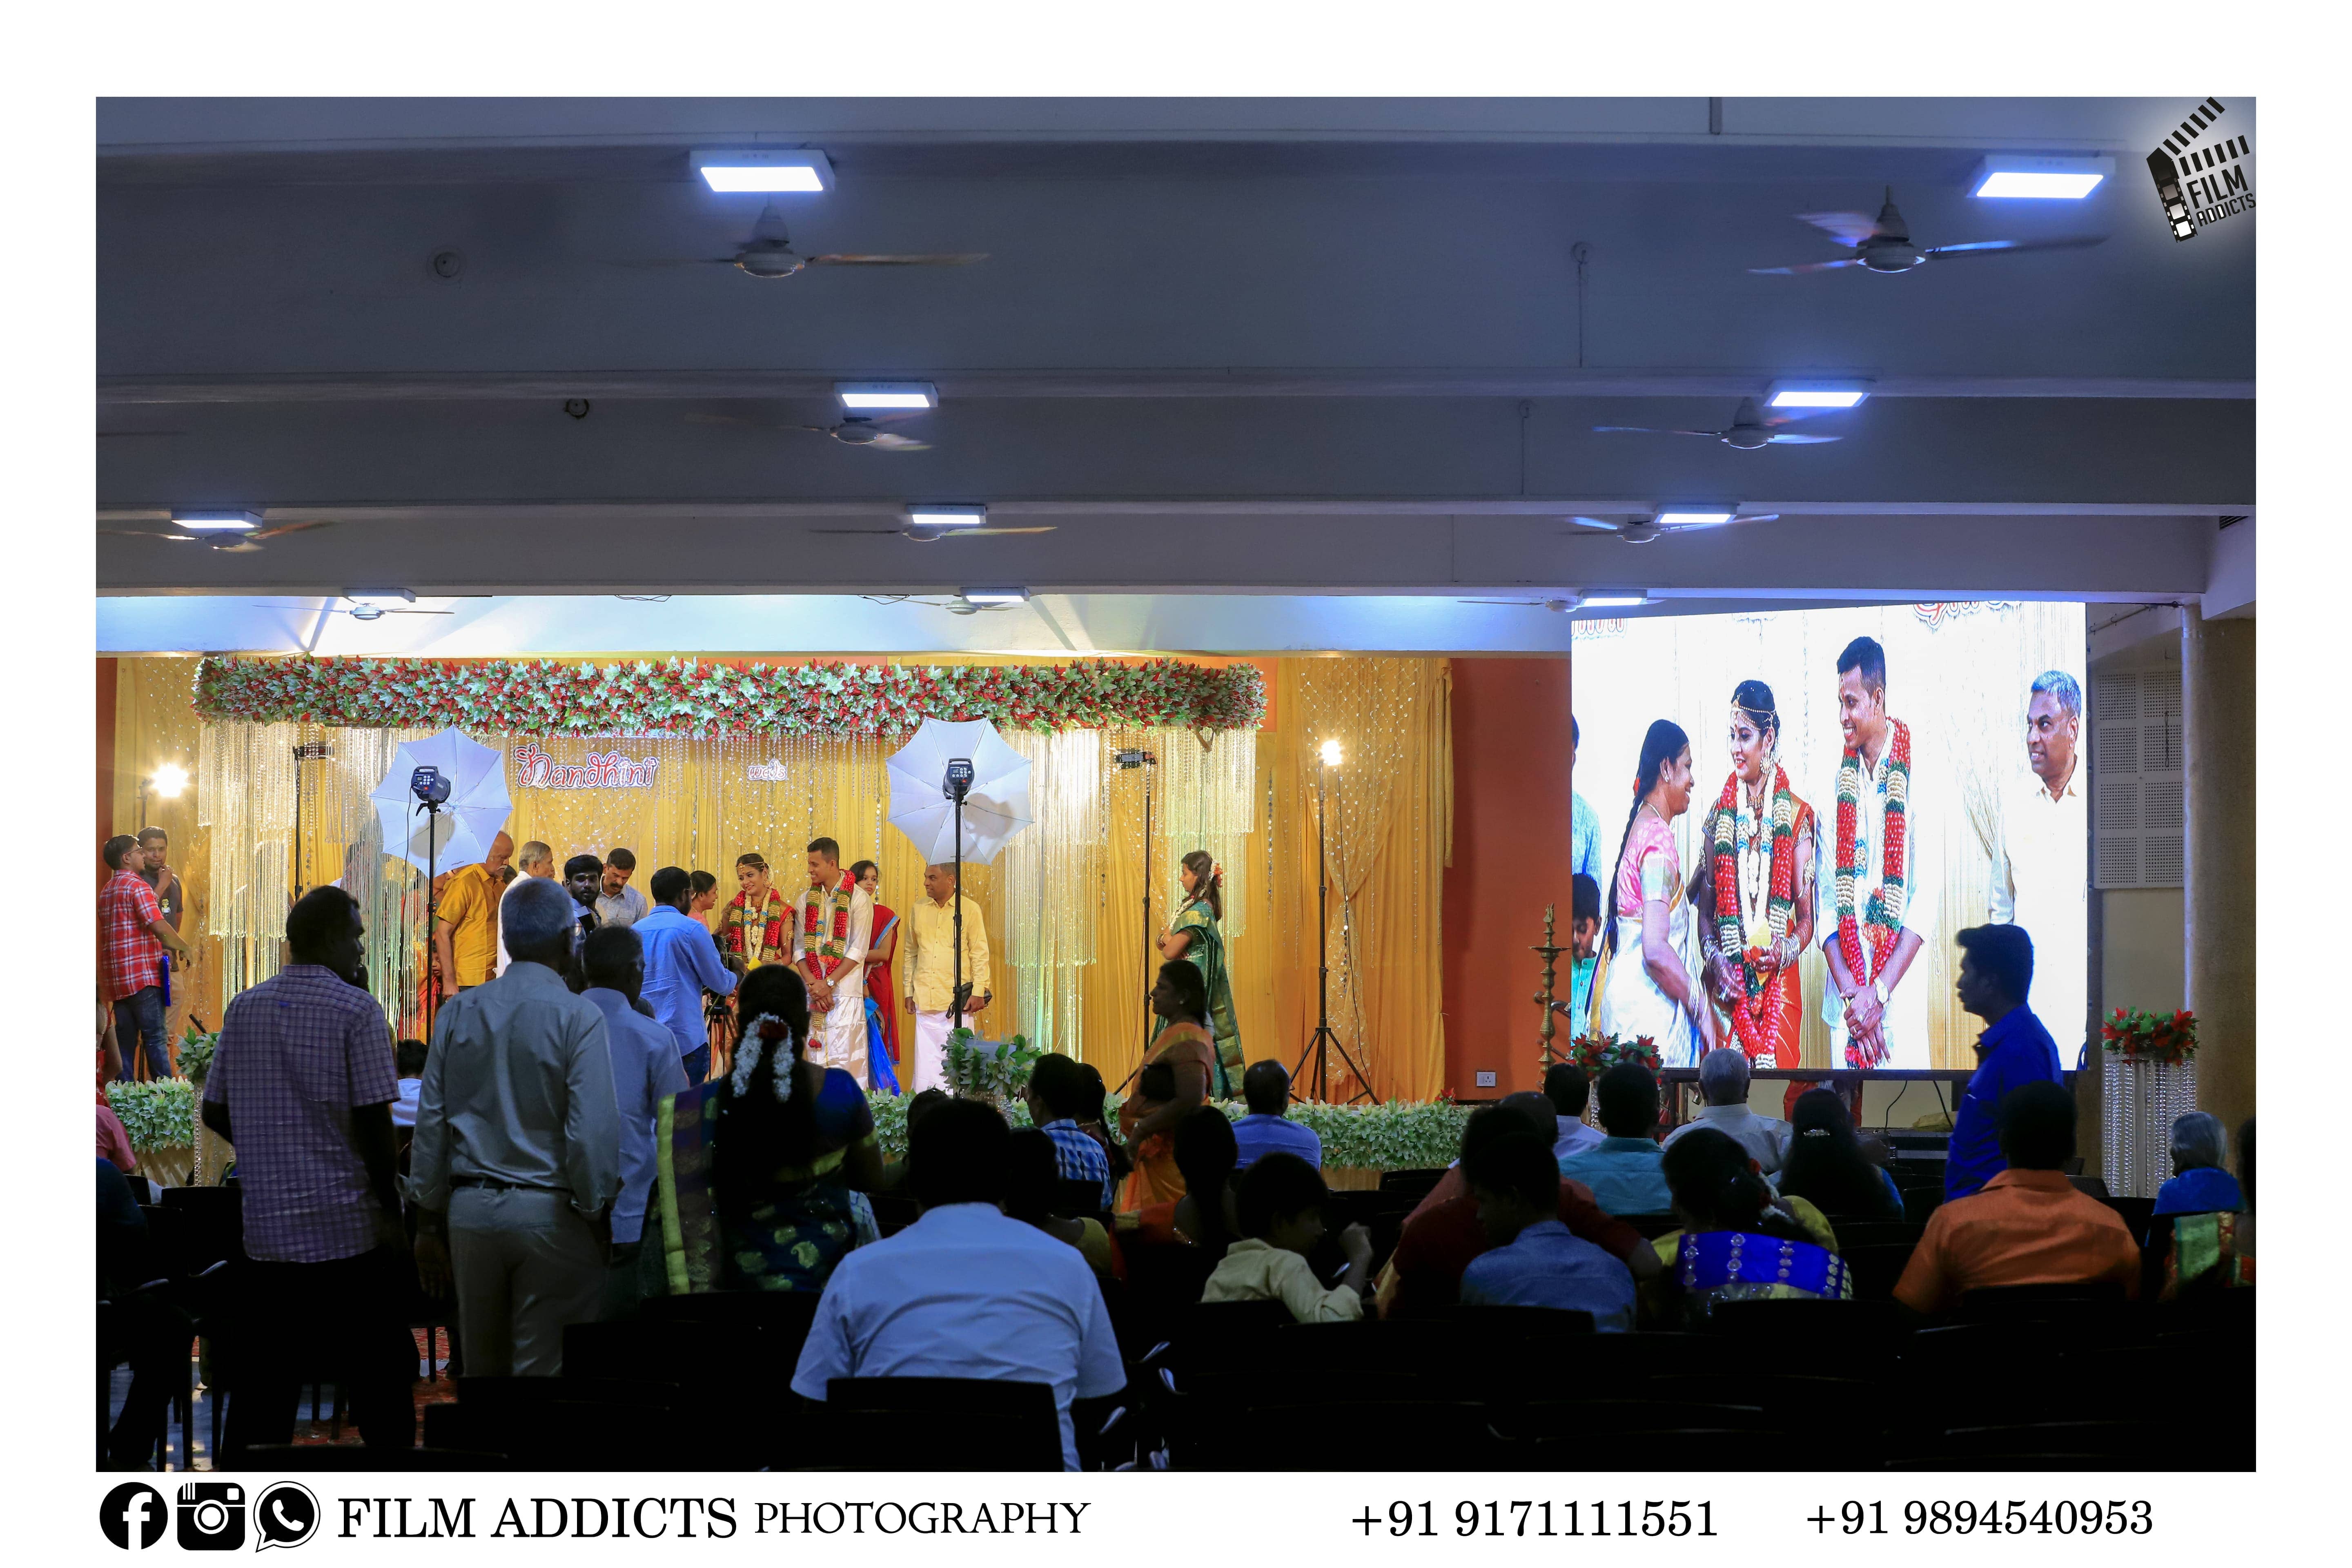 Led wall in Dindigul, Led wall rental in Dindigul, Led wall display in Dindigul, Led wall wedding in Dindigul, Led wall for wedding reception, Led wall event in Dindigul, Led wall event management in Dindigul, Led video wall for events in Dindigul, led video wall rental in Dindigul, wedding led video wall rental & hiring Dindigul, marriage led video wall rental & hiring in Dindigul, wedding led screen rental Dindigul, marriage led screen Dindigul, indoor & outdoor led video wall in Dindigul, led wall in marriage, led wall rental in Dindigul, led rental, led video wall hiring Dindigul, marriage led screen, wedding led screen rental,live streaming in Dindigul, live streaming, live tv, live streaming wedding, wedding live streaming Dindigul, marriage live streaming Dindigul, live streaming services in Dindigul, live streaming wedding Dindigul.